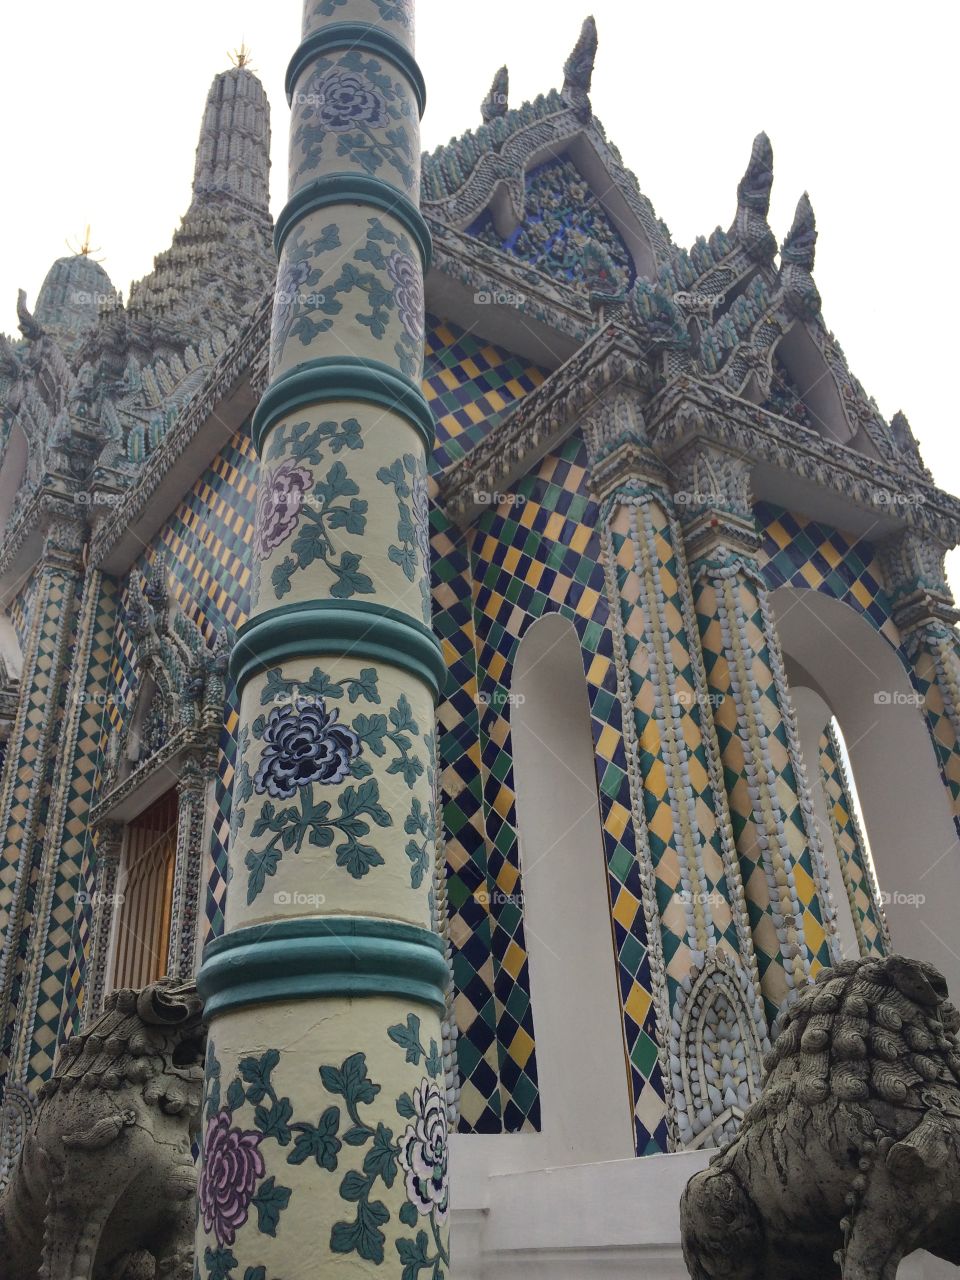 Bangkok, Thailand: Grand Palace temple with mosaic tiles and patterned tiles